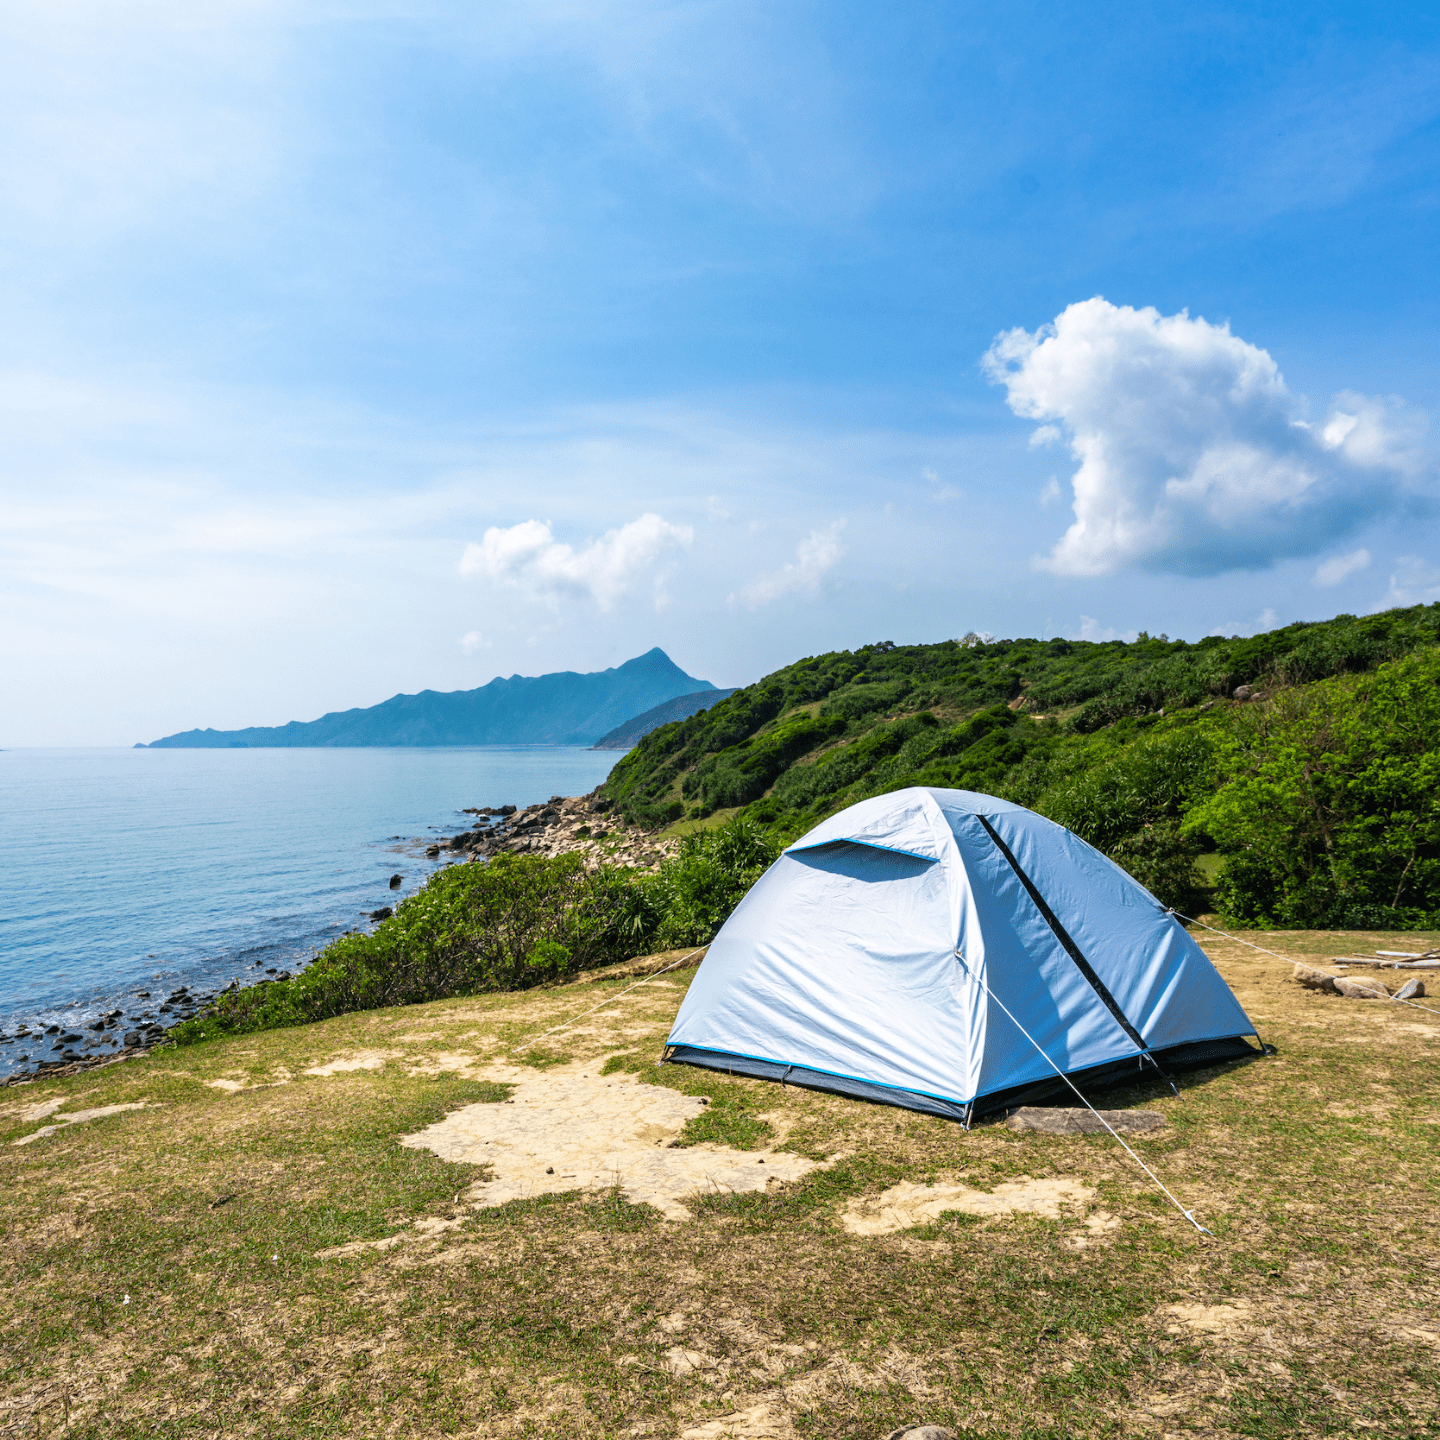 Where To Go Camping: Top 10 Camping Sites In Hong Kong